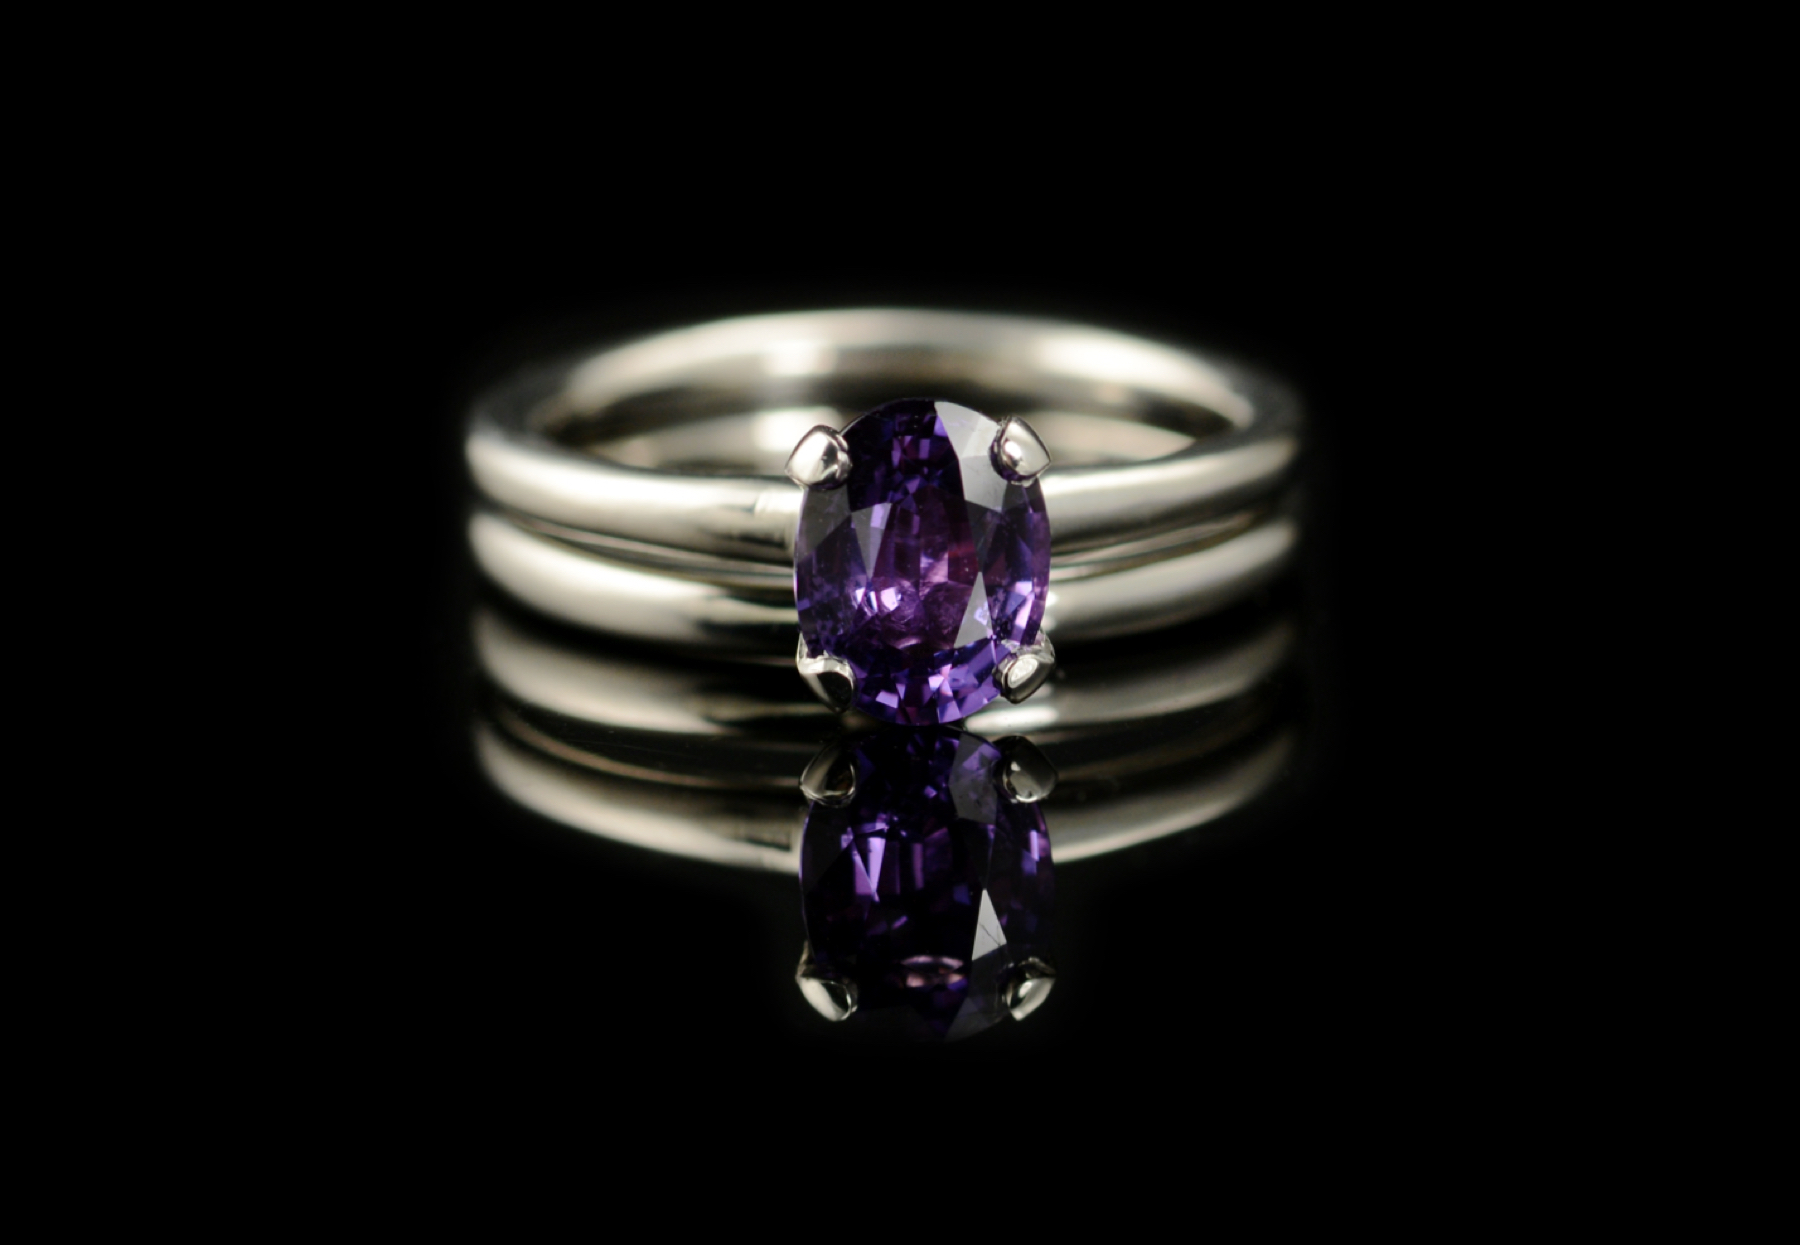 Oval purple sapphire 4-claw engagement ring with matching wedding ring